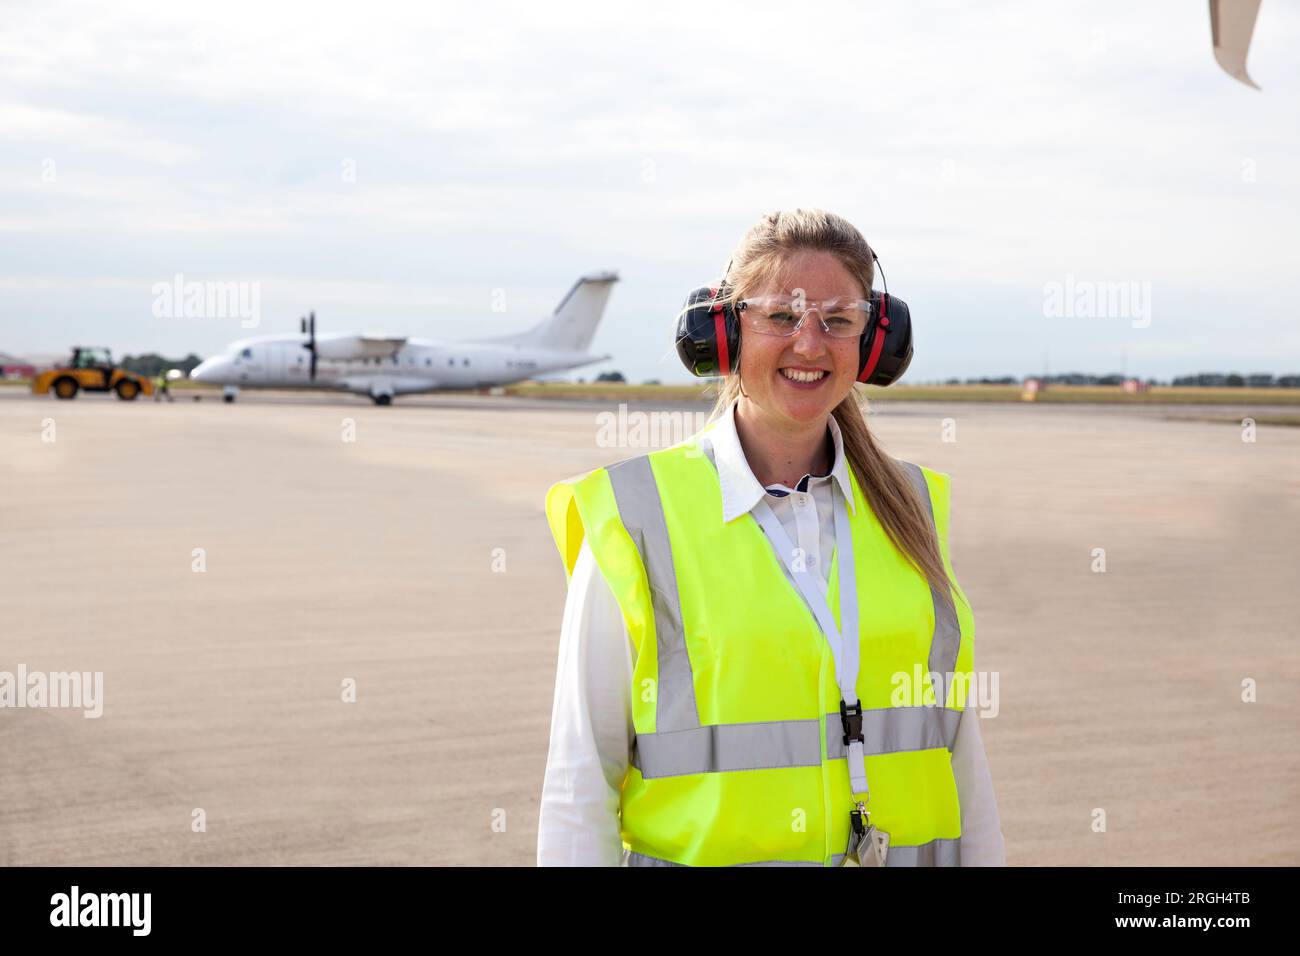 Smiling worker wearing ear muffs on airplane runway Stock Photo